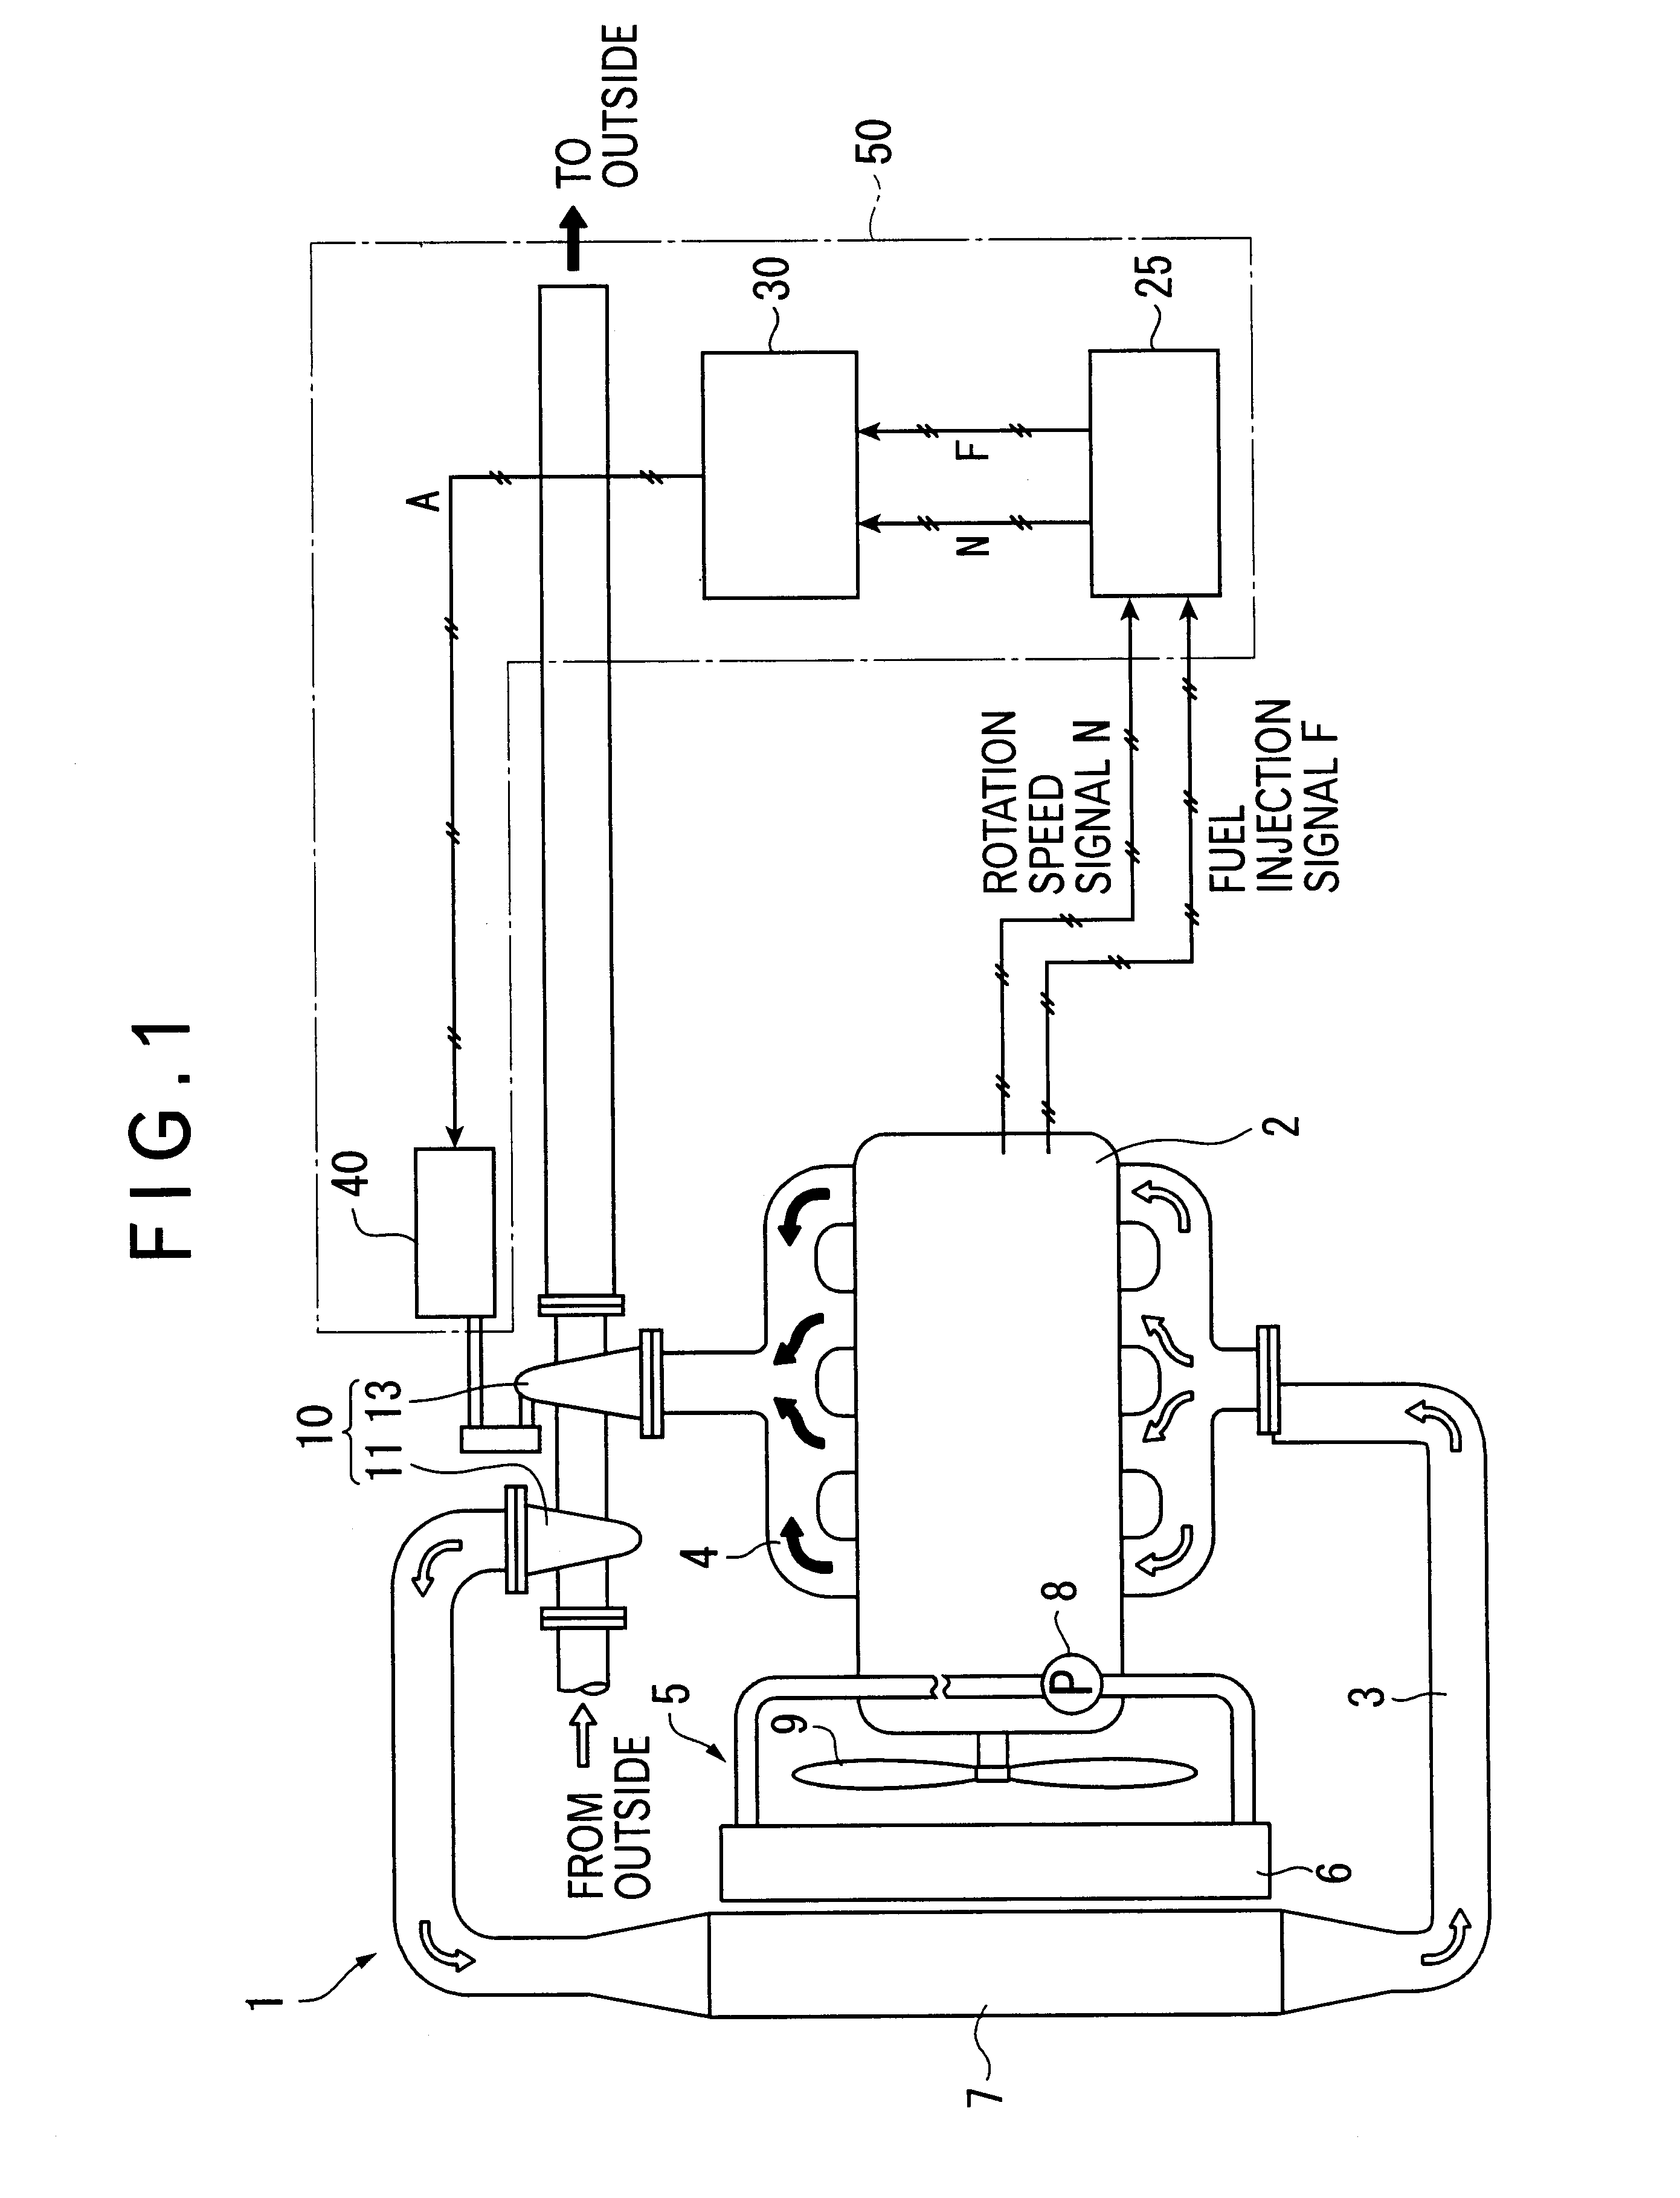 Variable nozzle opening control system for an exhaust turbine supercharger